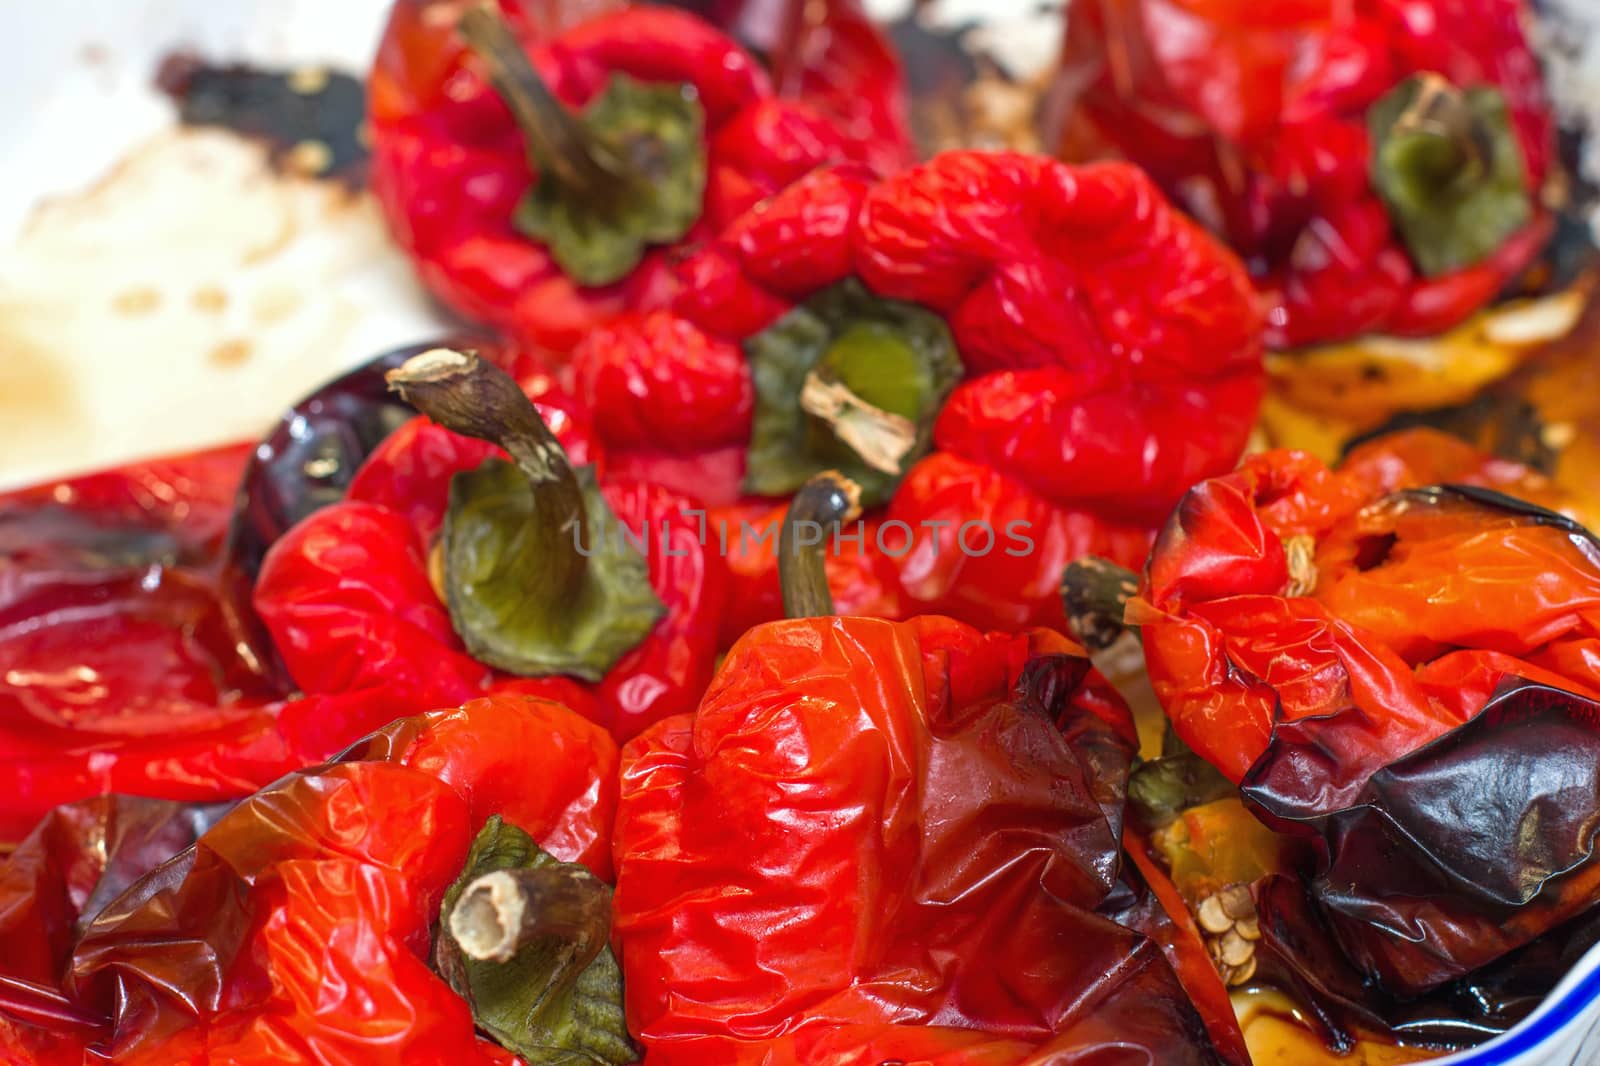 Roasted red pepper, paprika, grill, barbecue, baked peppers, healthy food, spicy